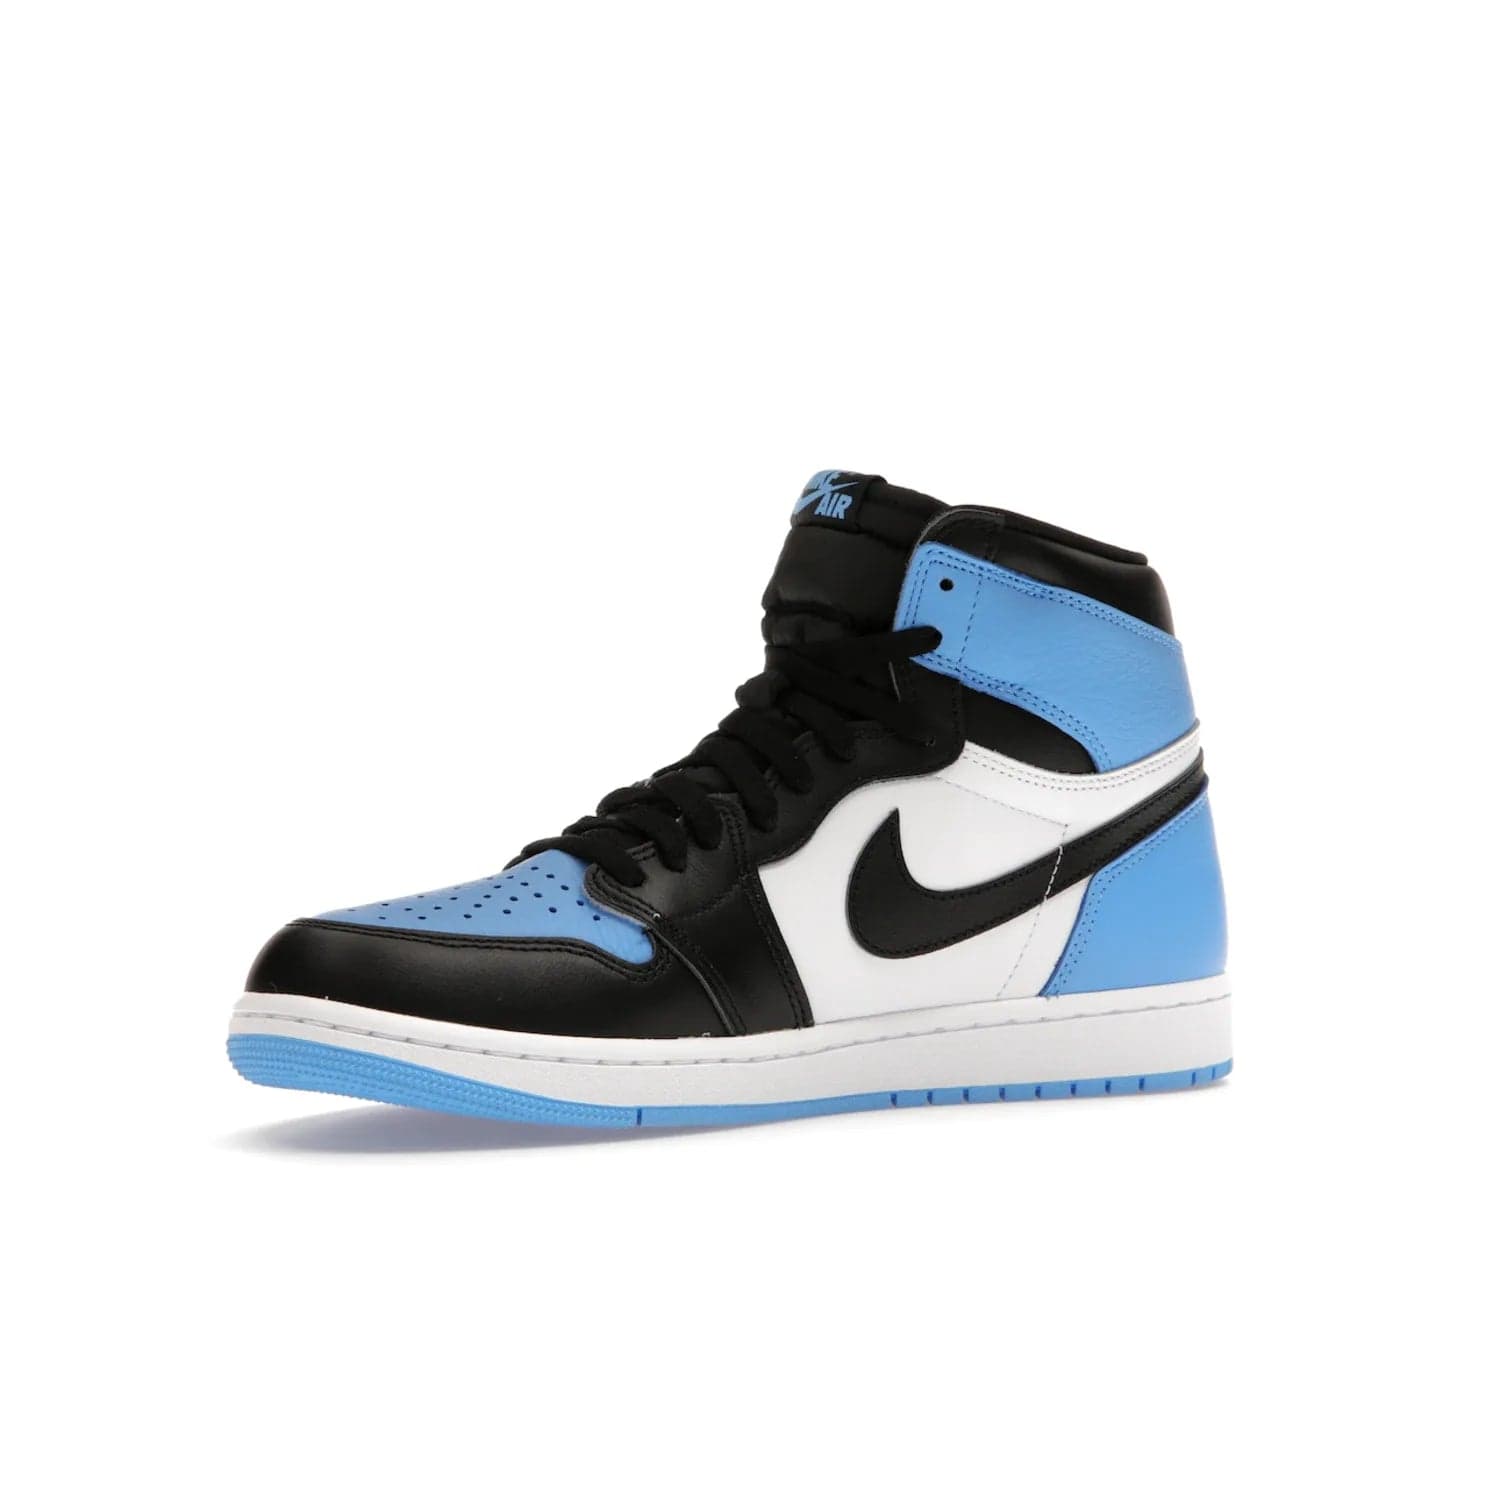 Jordan 1 Retro High OG UNC Toe - Image 16 - Only at www.BallersClubKickz.com - Jordan 1 High OG UNC Toe is a fashionable, high-quality sneaker featuring University Blue, Black White and White. Releasing July 22, 2023, it's the perfect pick up for sneakerheads.